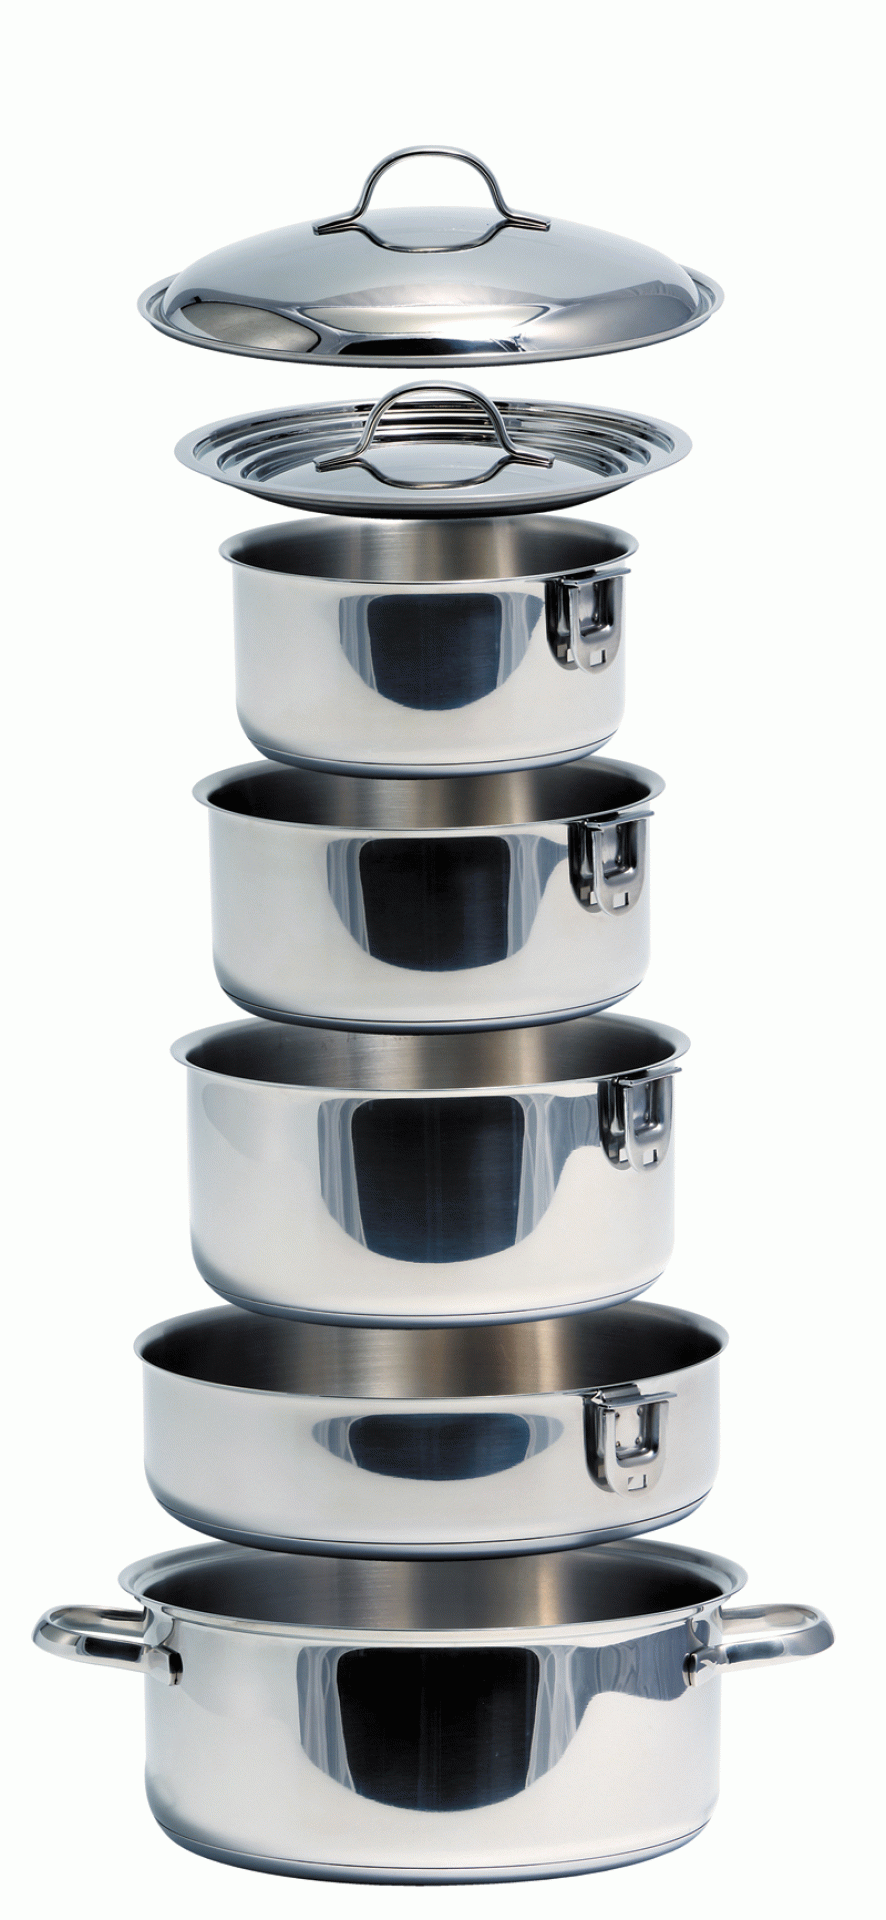 CAMCO MFG INC | 43921 | Stainless Steel Cookware - 10 pc Set